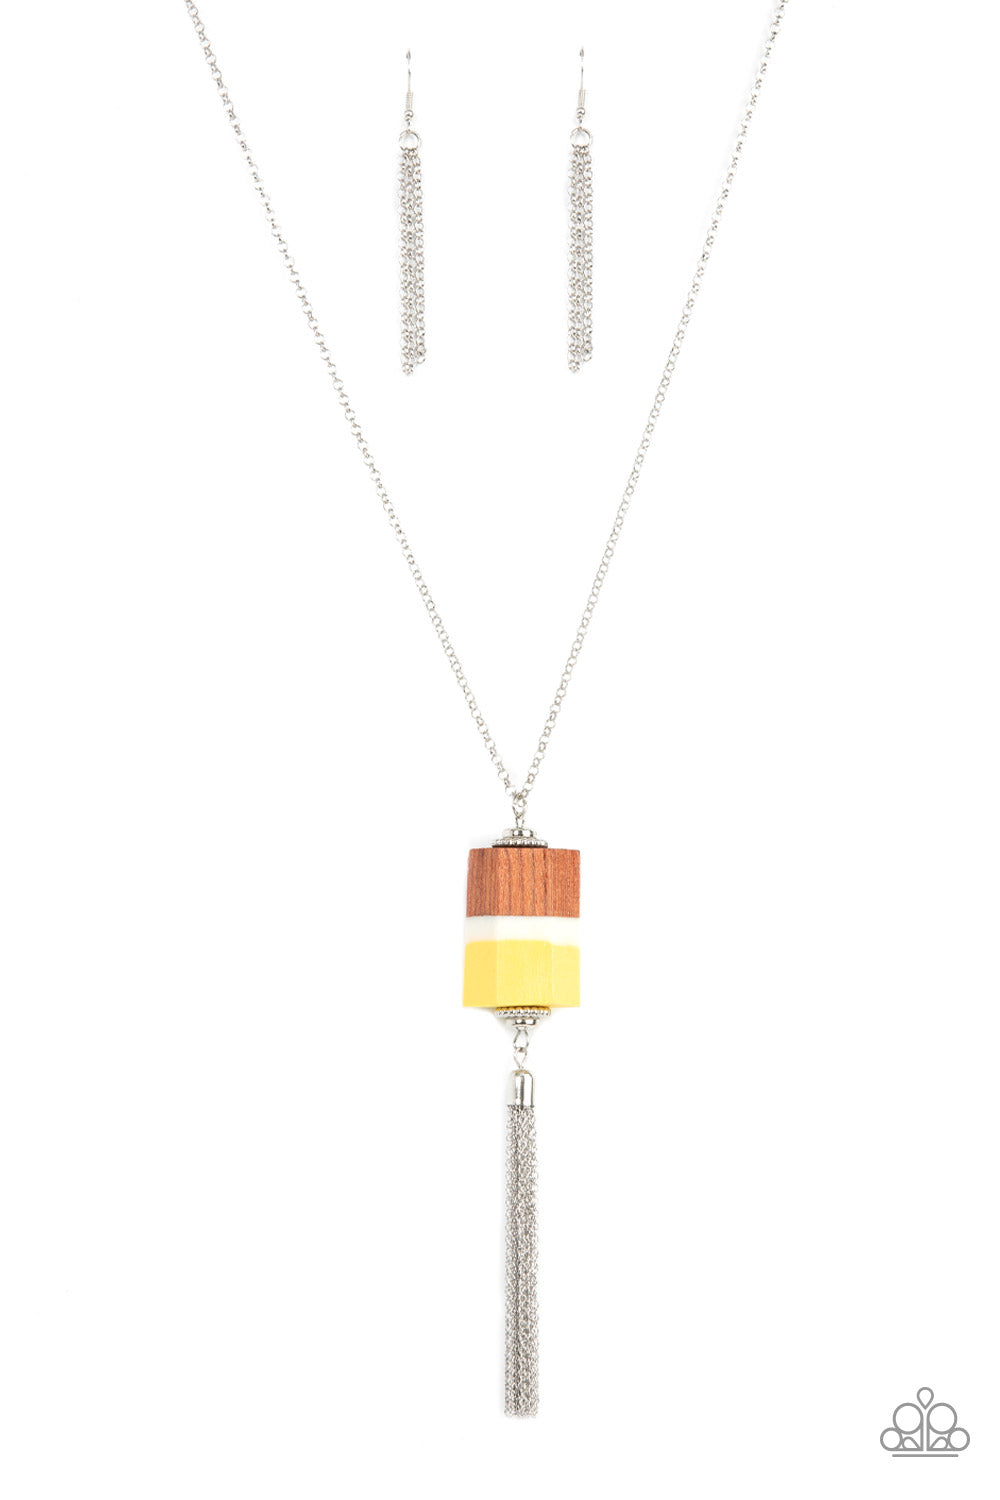 Paparazzi - Reel It In - Yellow Necklace